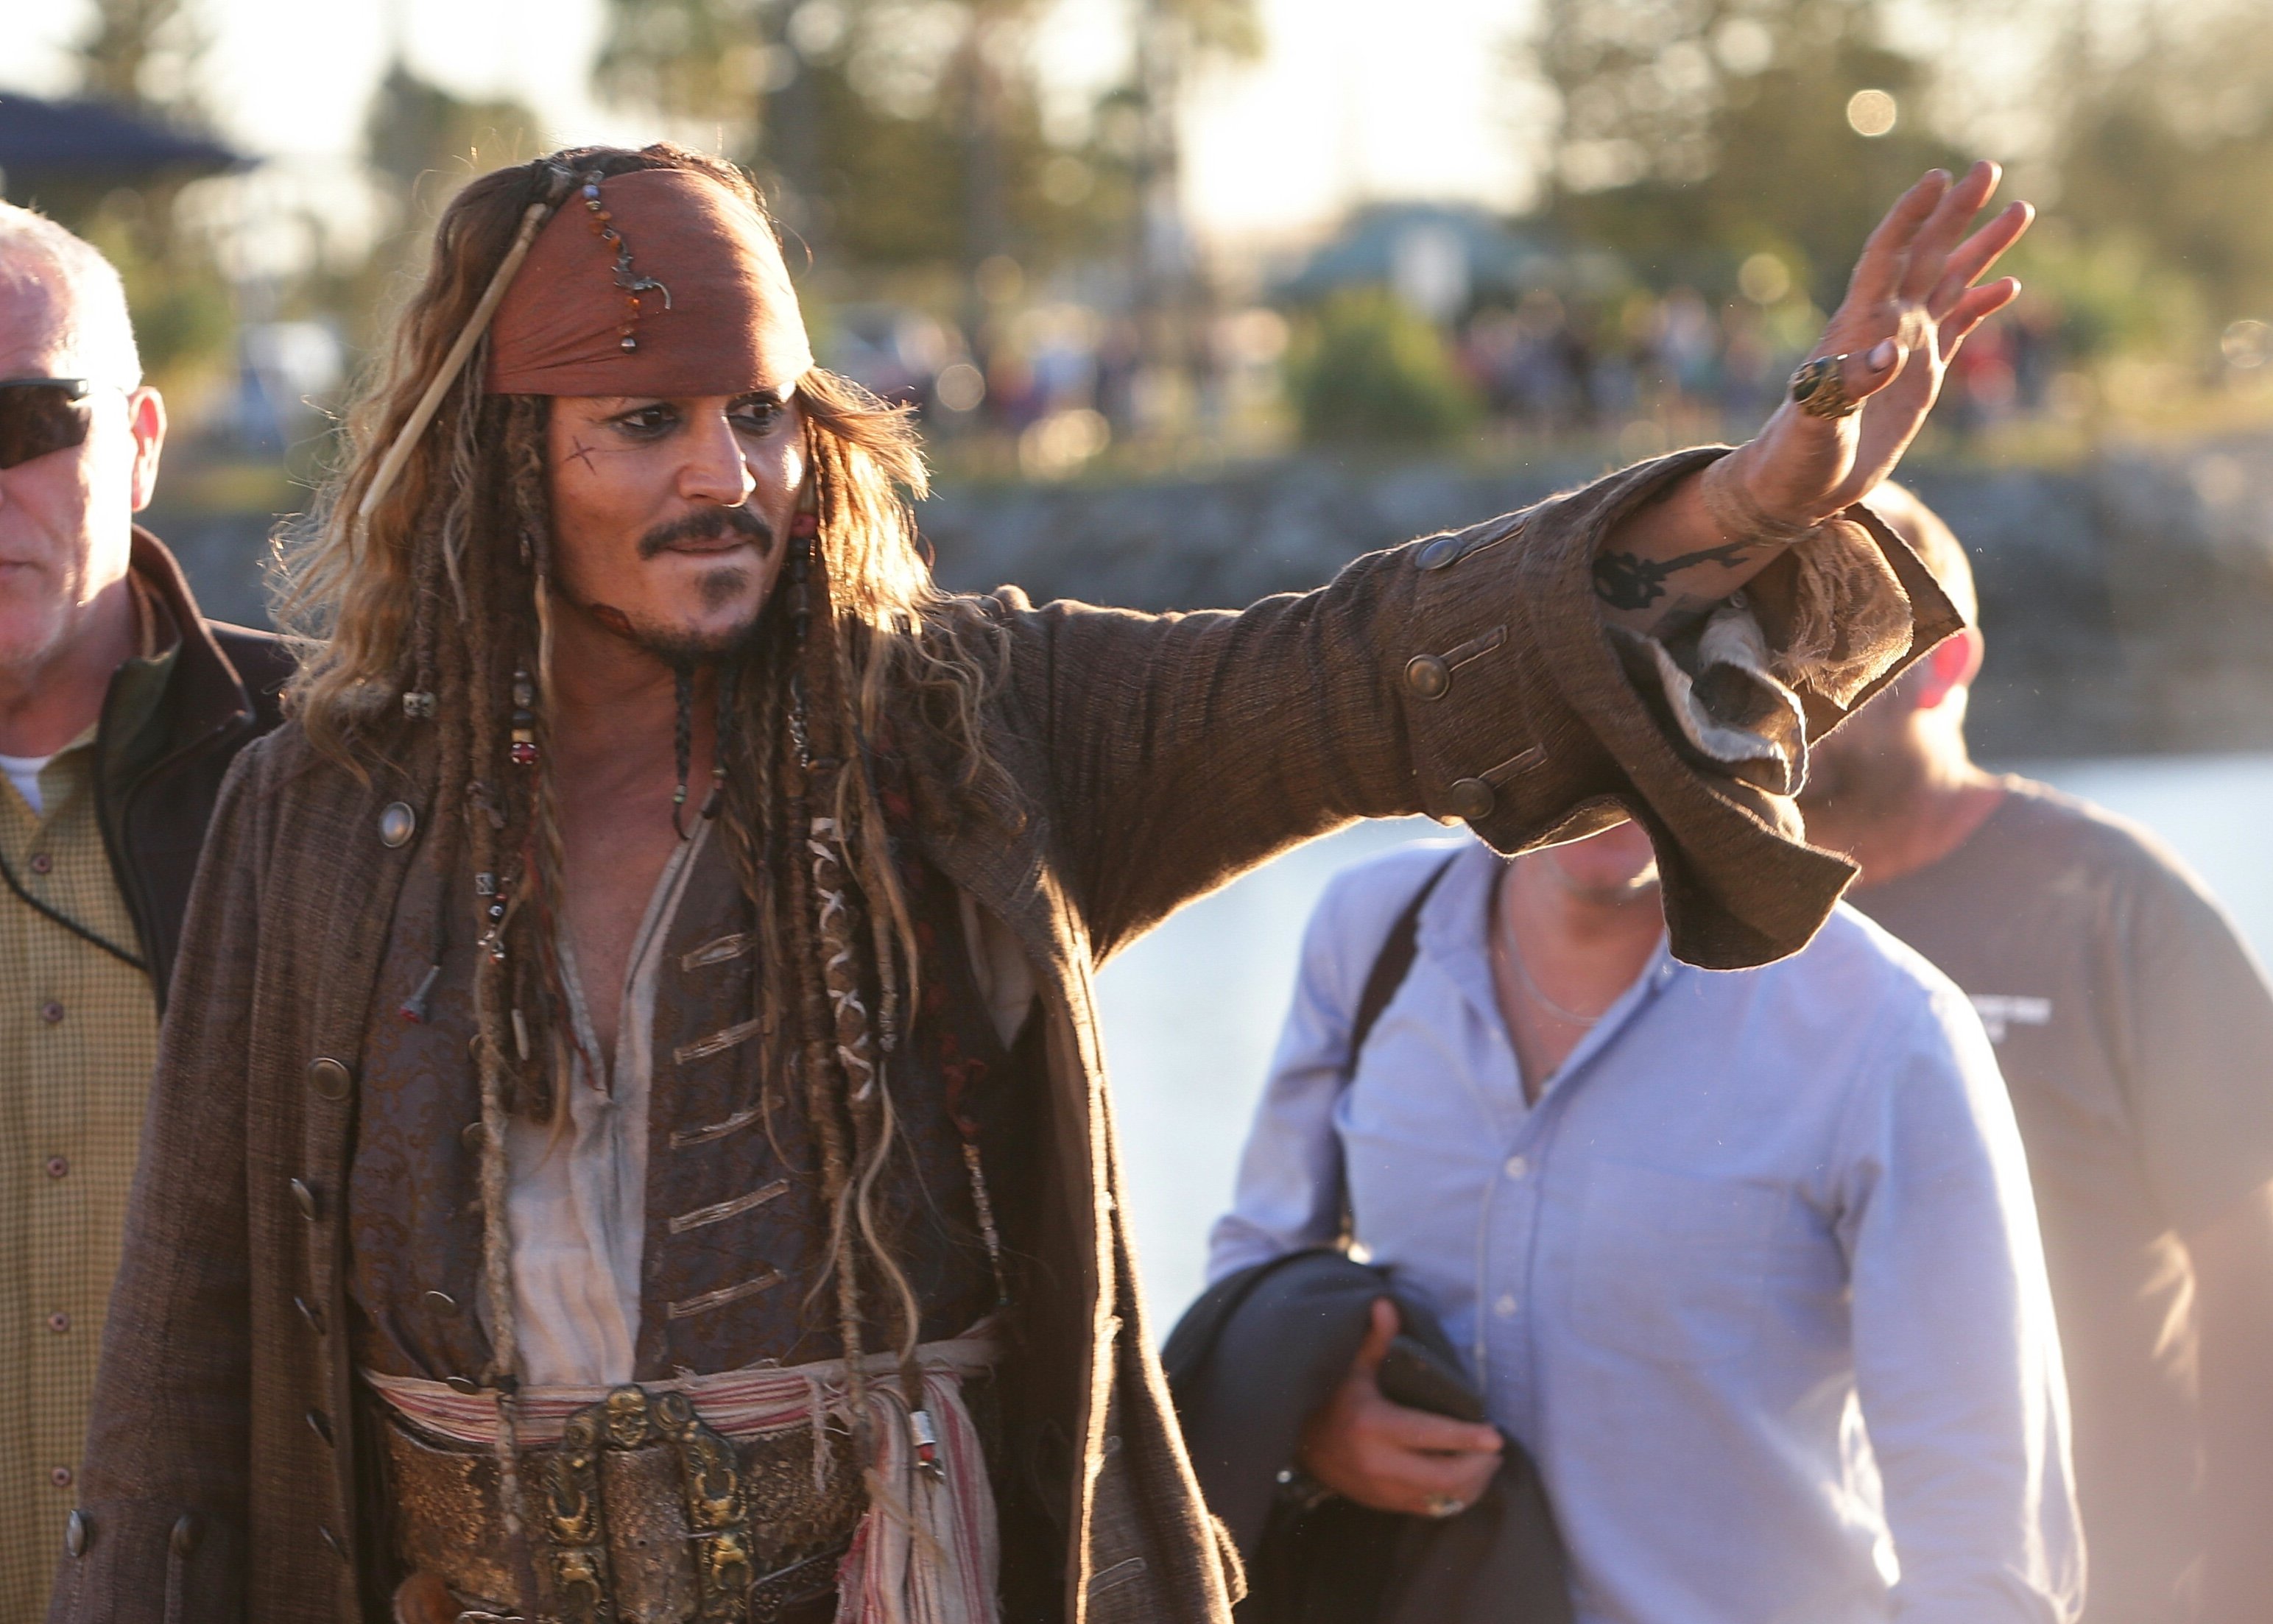 Johnny Depp greets fans dressed as Jack Sparrow after filming Pirates of the Caribbean in Cleveland, Australia